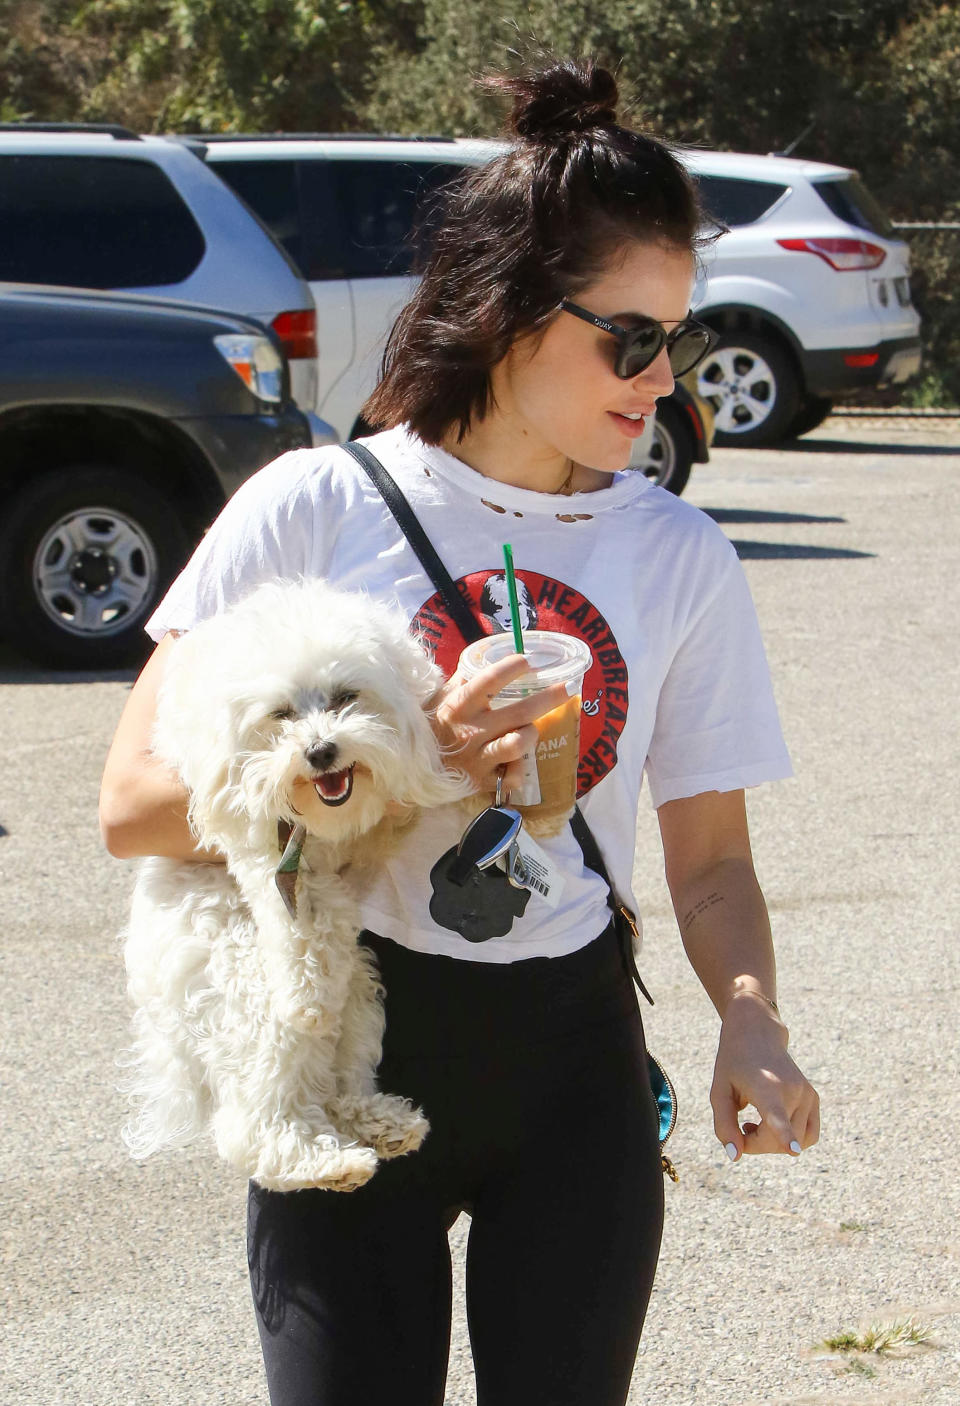 Lucy Hale and her dog Elvis.&nbsp; (Photo: BG003/Bauer-Griffin via Getty Images)